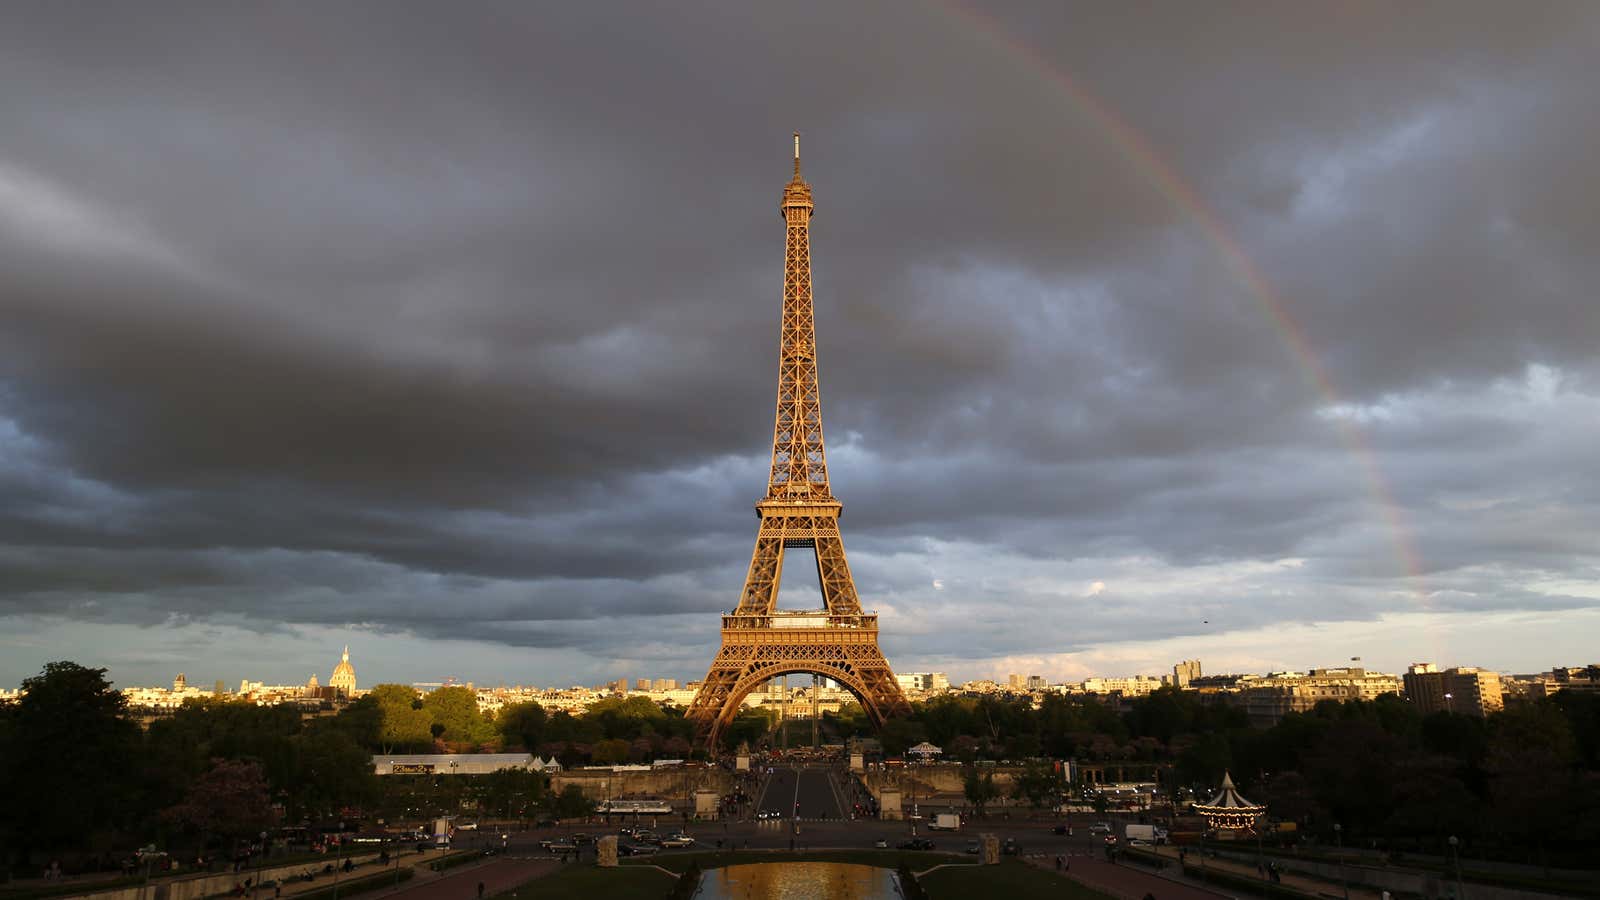 The iconic Eiffel Tower still beckons to strangers near and far.